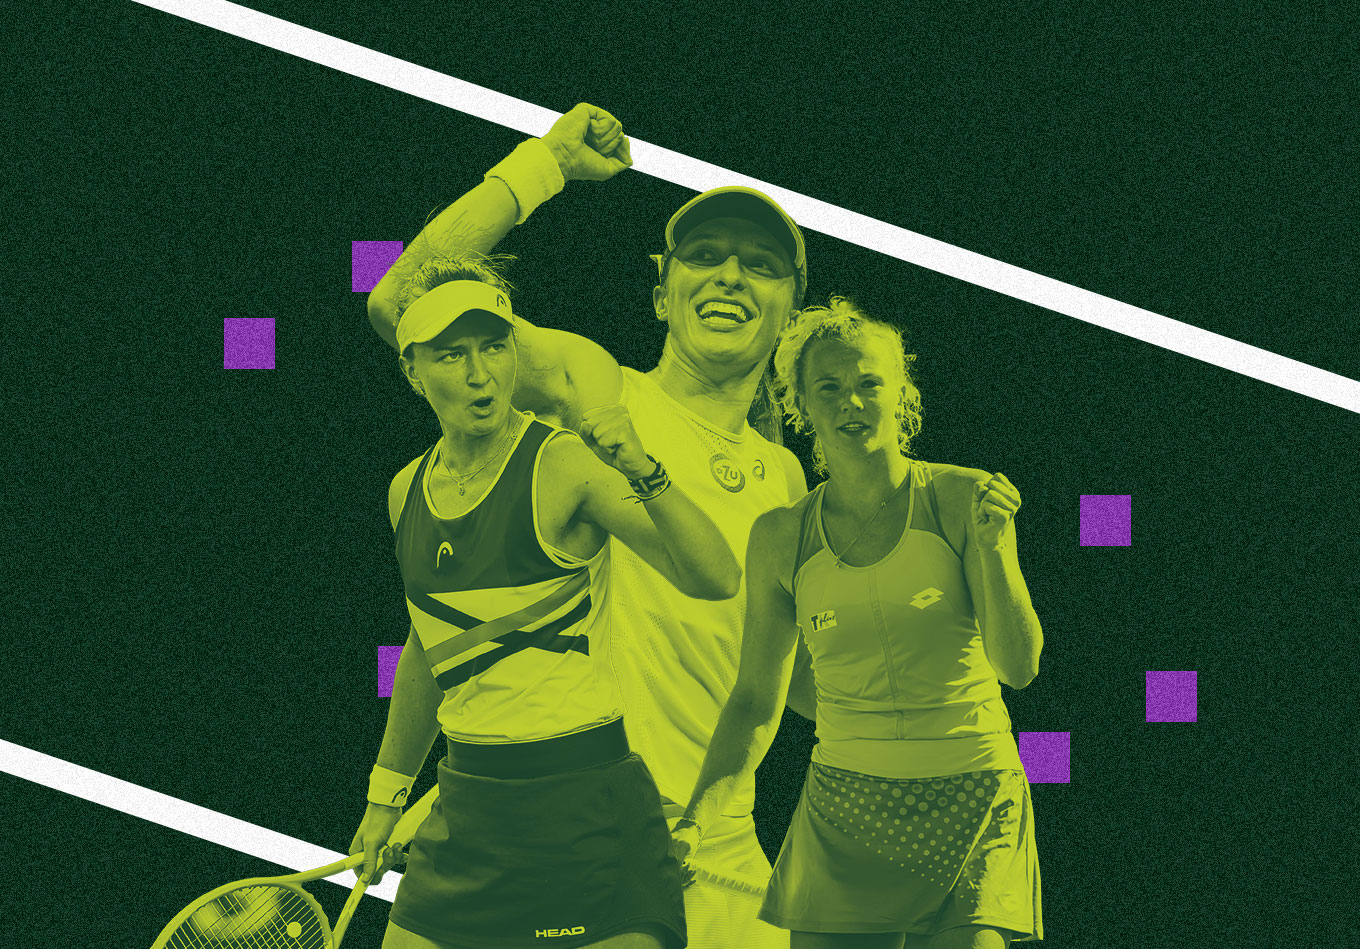 2022 WTA Finals Tournament Preview The Analyst